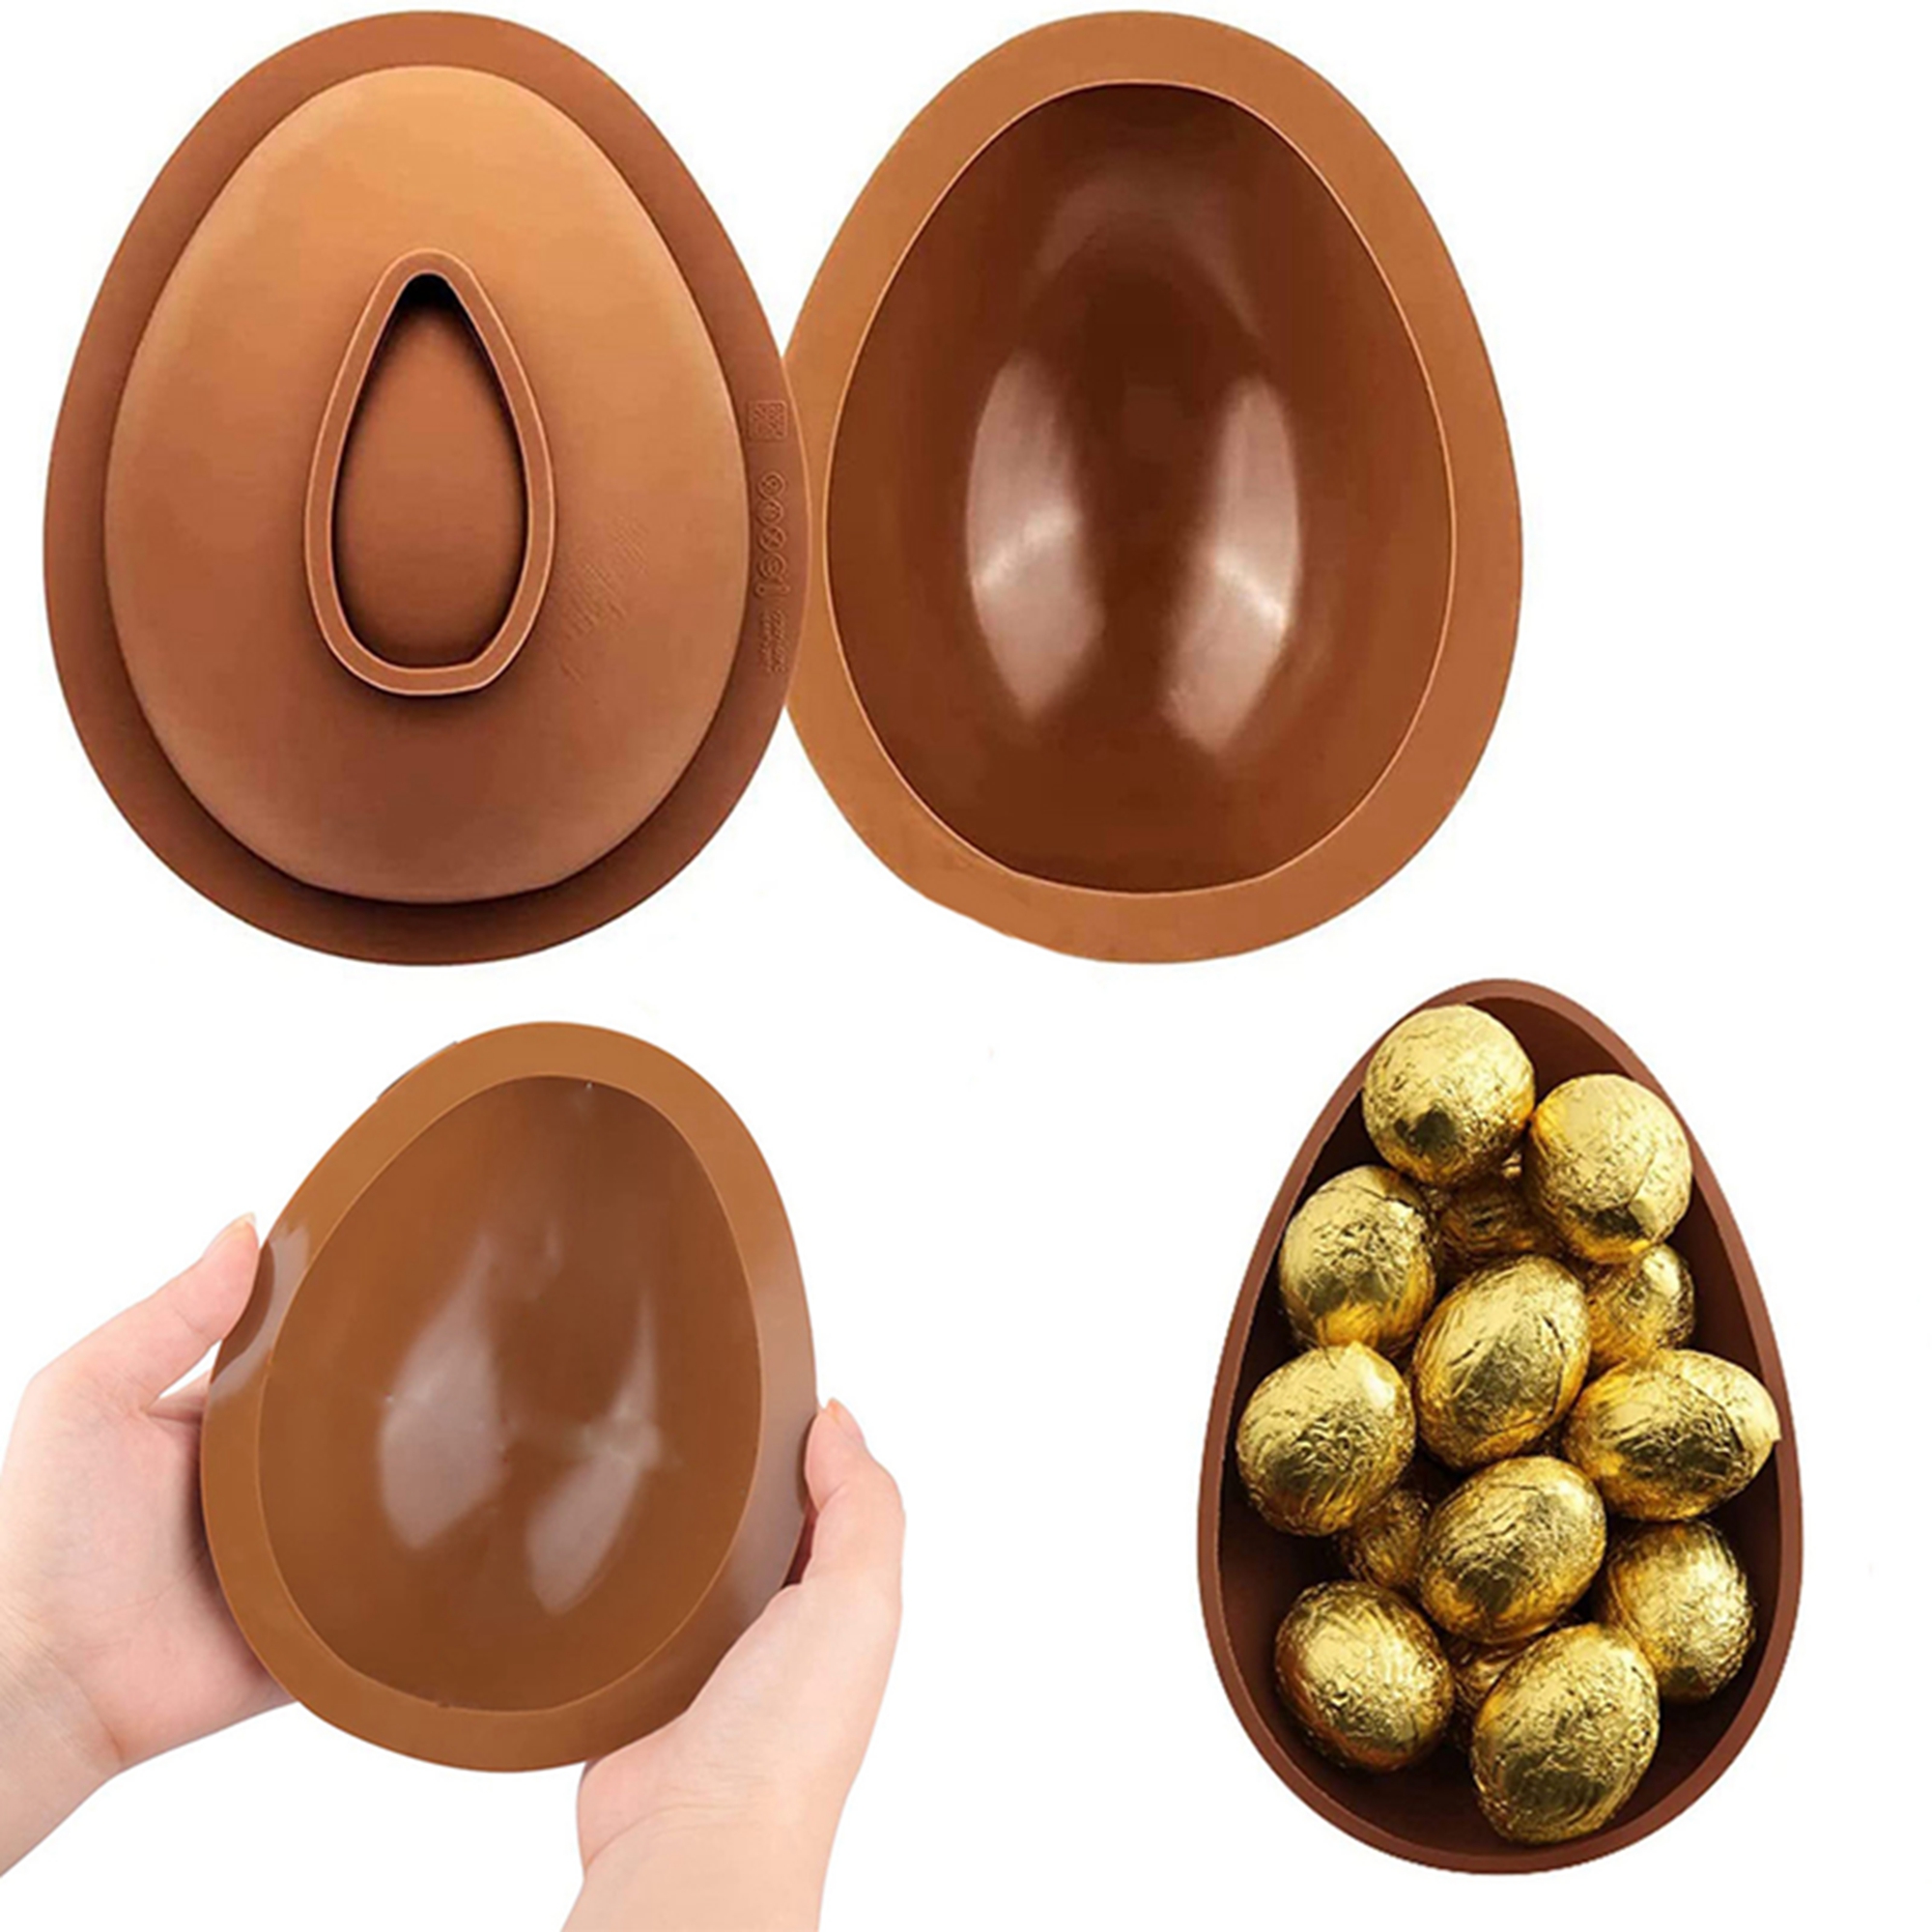 Multitrust Easter Egg Silicone Mold Half Egg Shape Chocolate Mold for Easter Baking Candy Party Jelly Decorating DIY Cake, Adult Unisex, Size: Pack of